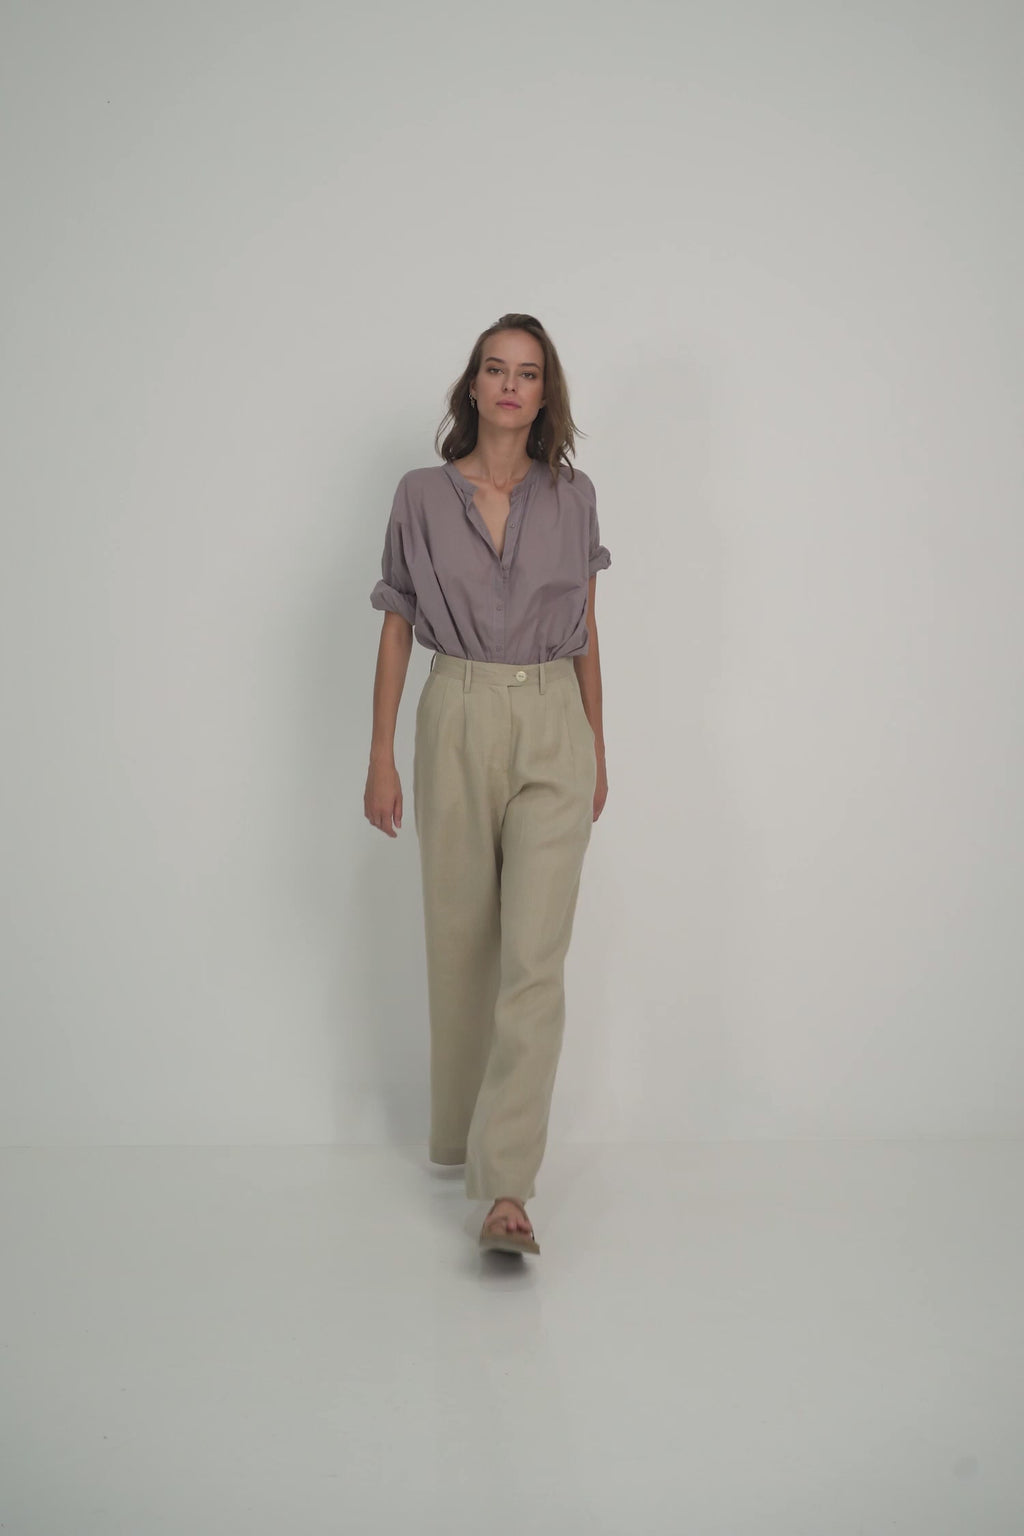 A Woman Wearing Natural Linen Flared Pants in Australia